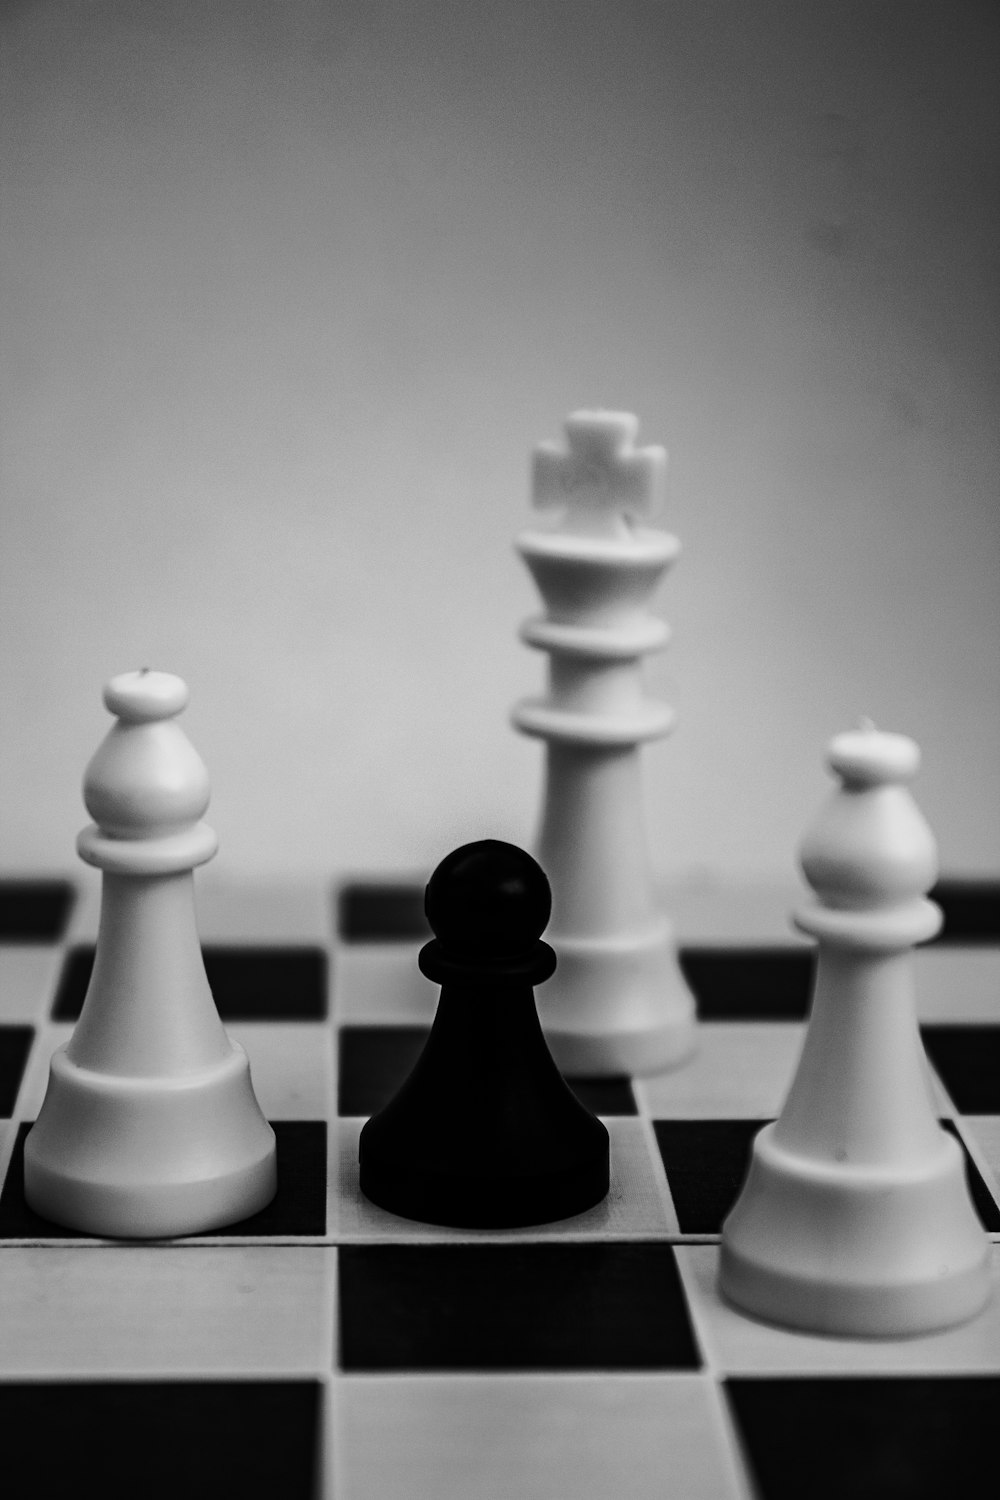 grayscale photo of king, pawn, and bishop chess pieces